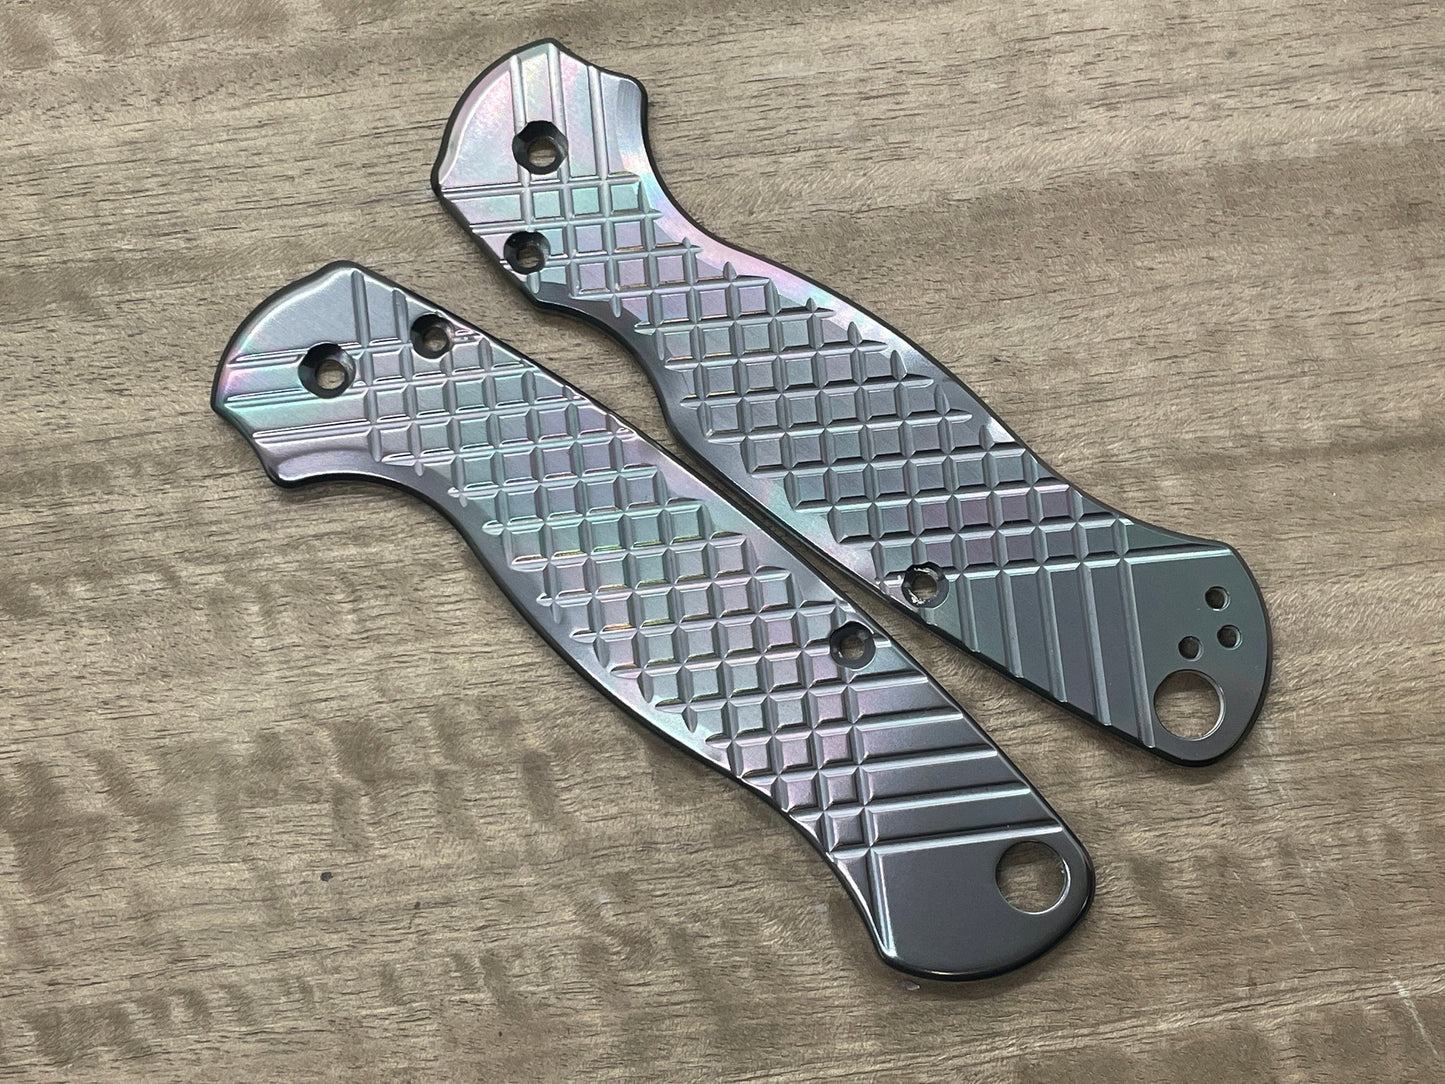 Oil Slick FRAG milled Zirconium scales for Spyderco Paramilitary 2 PM2